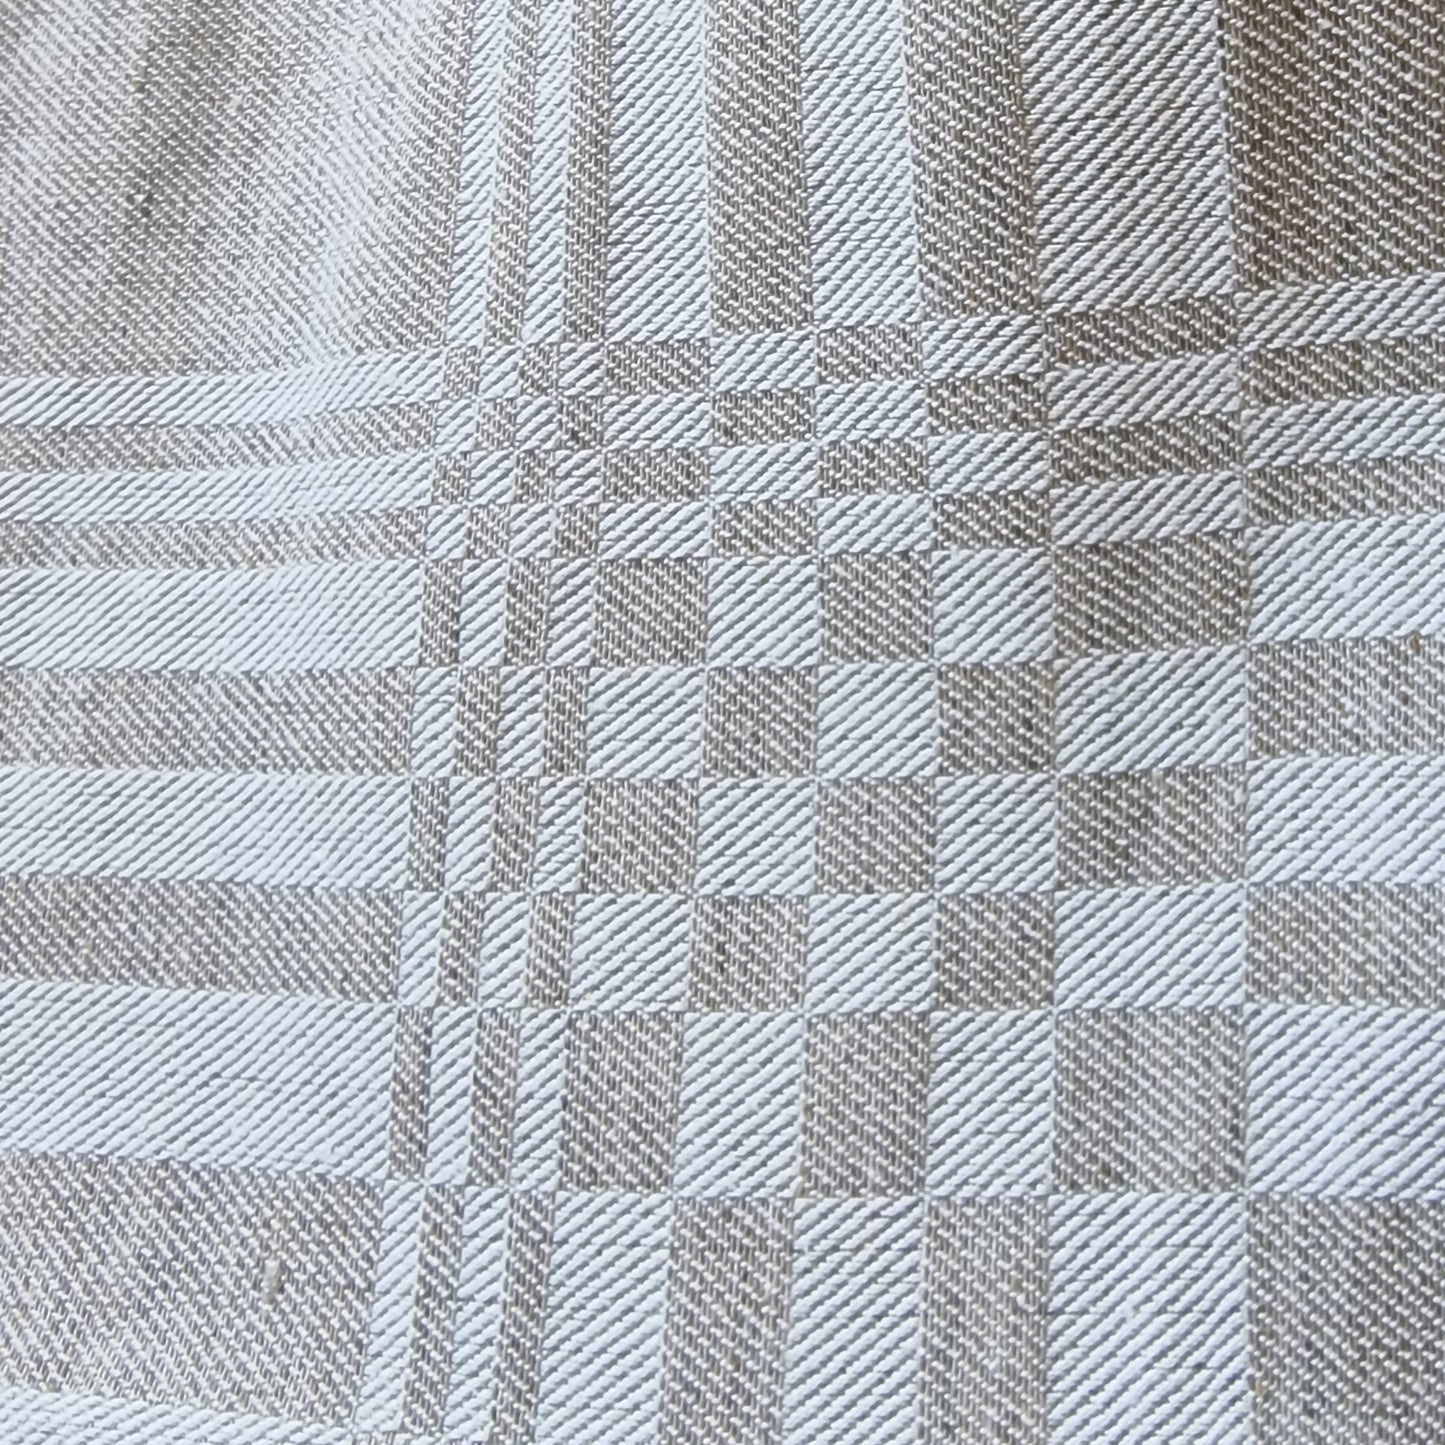 Shades of gray square-shaped linen tablecloth with a dremel pattern 85x85 cm. (DZPE 27)